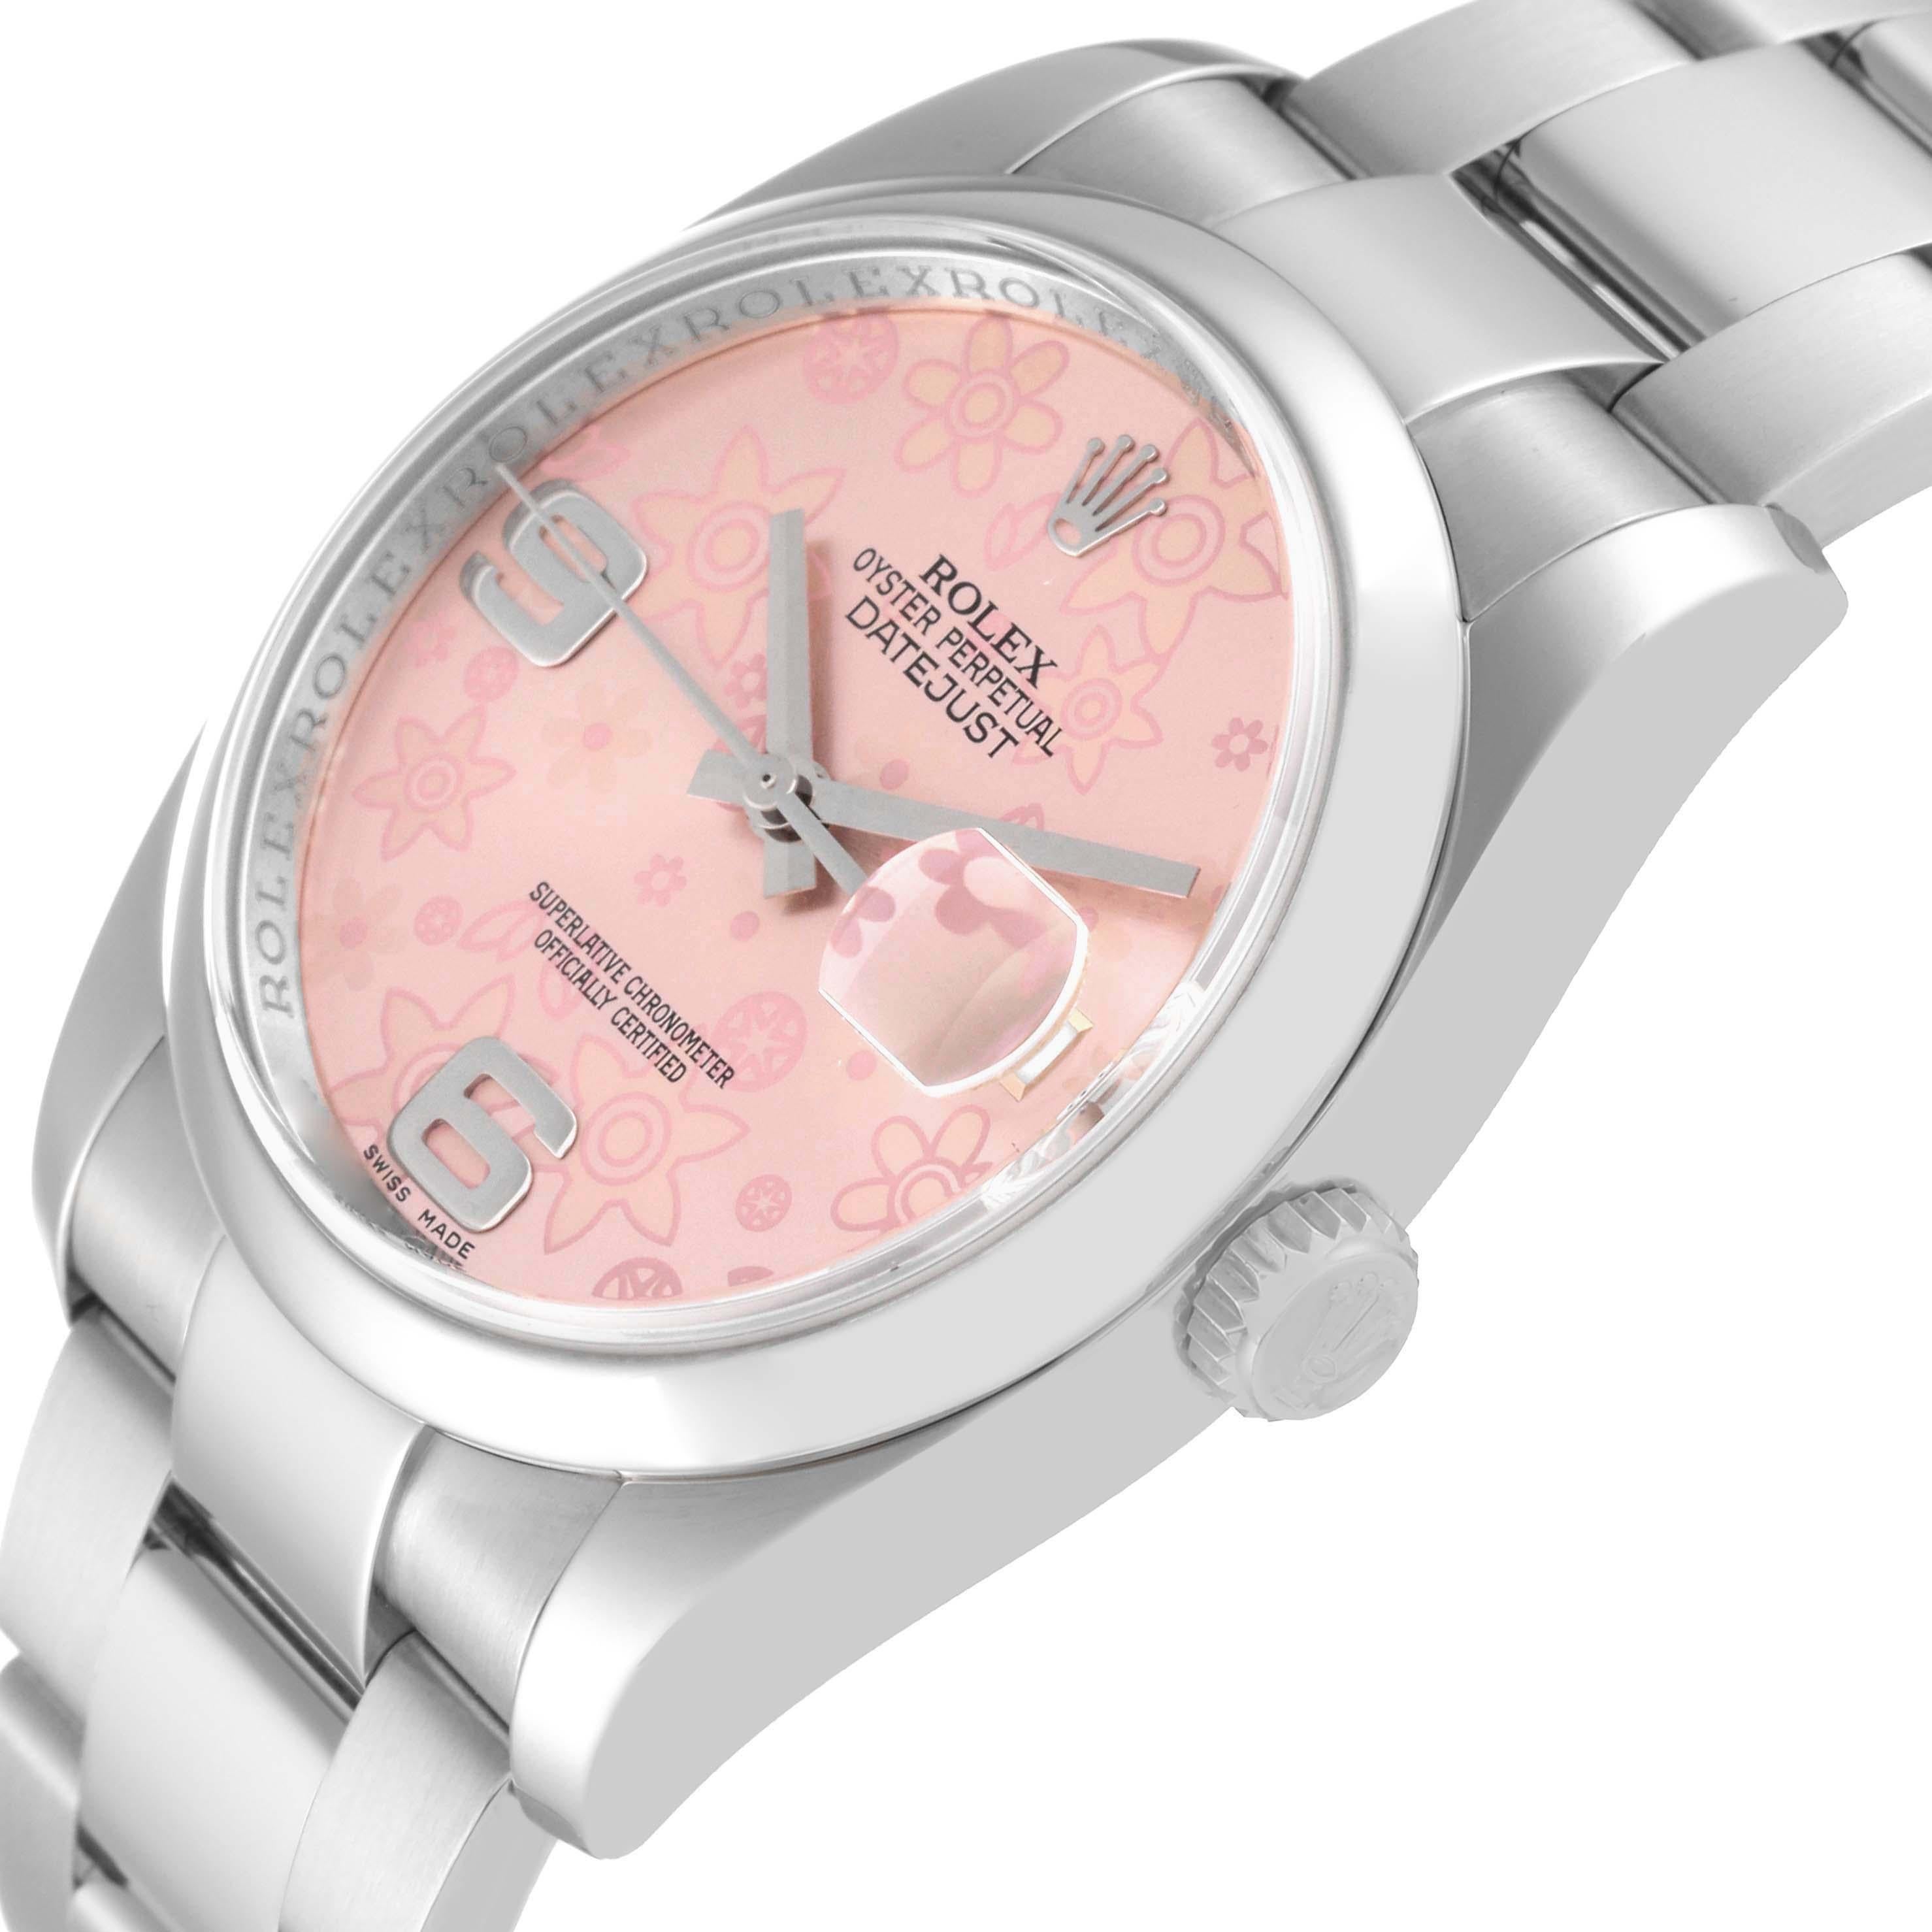 Rolex Datejust 36 Pink Floral Dial Steel Mens Watch 116200 Box Card 3